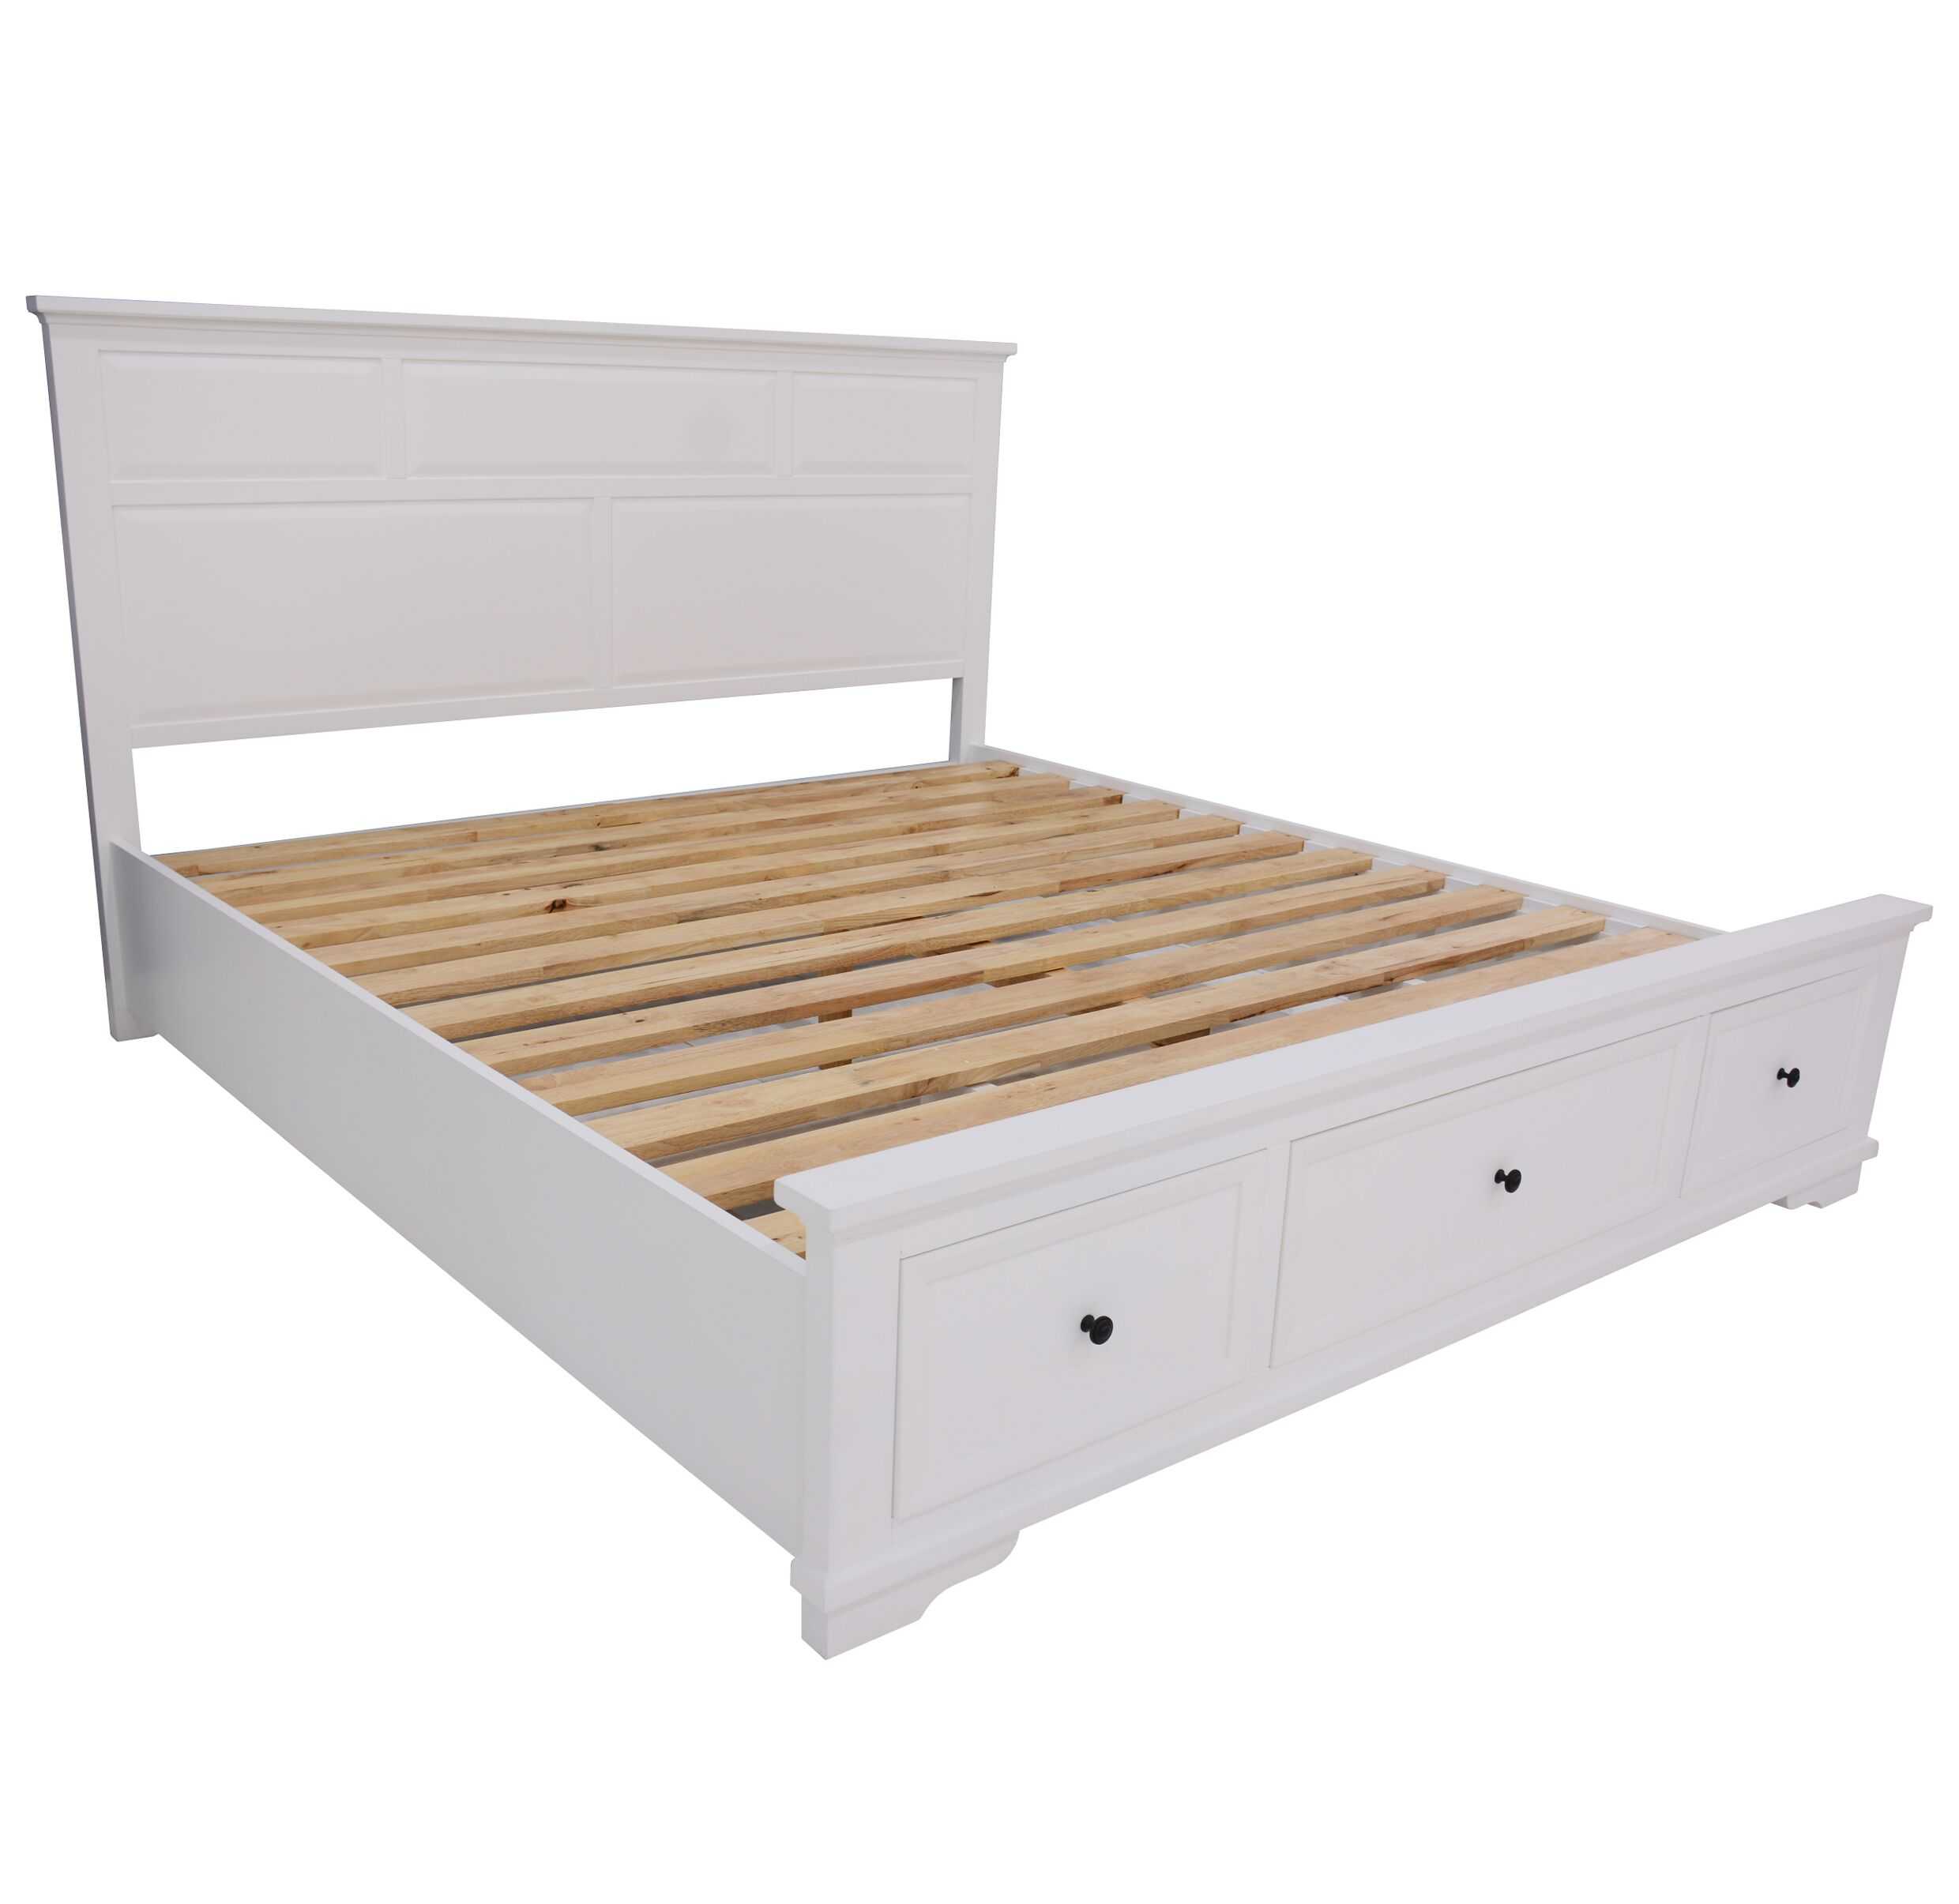 Affordable Vi Venti King Bed With, Timber King Bed Frame